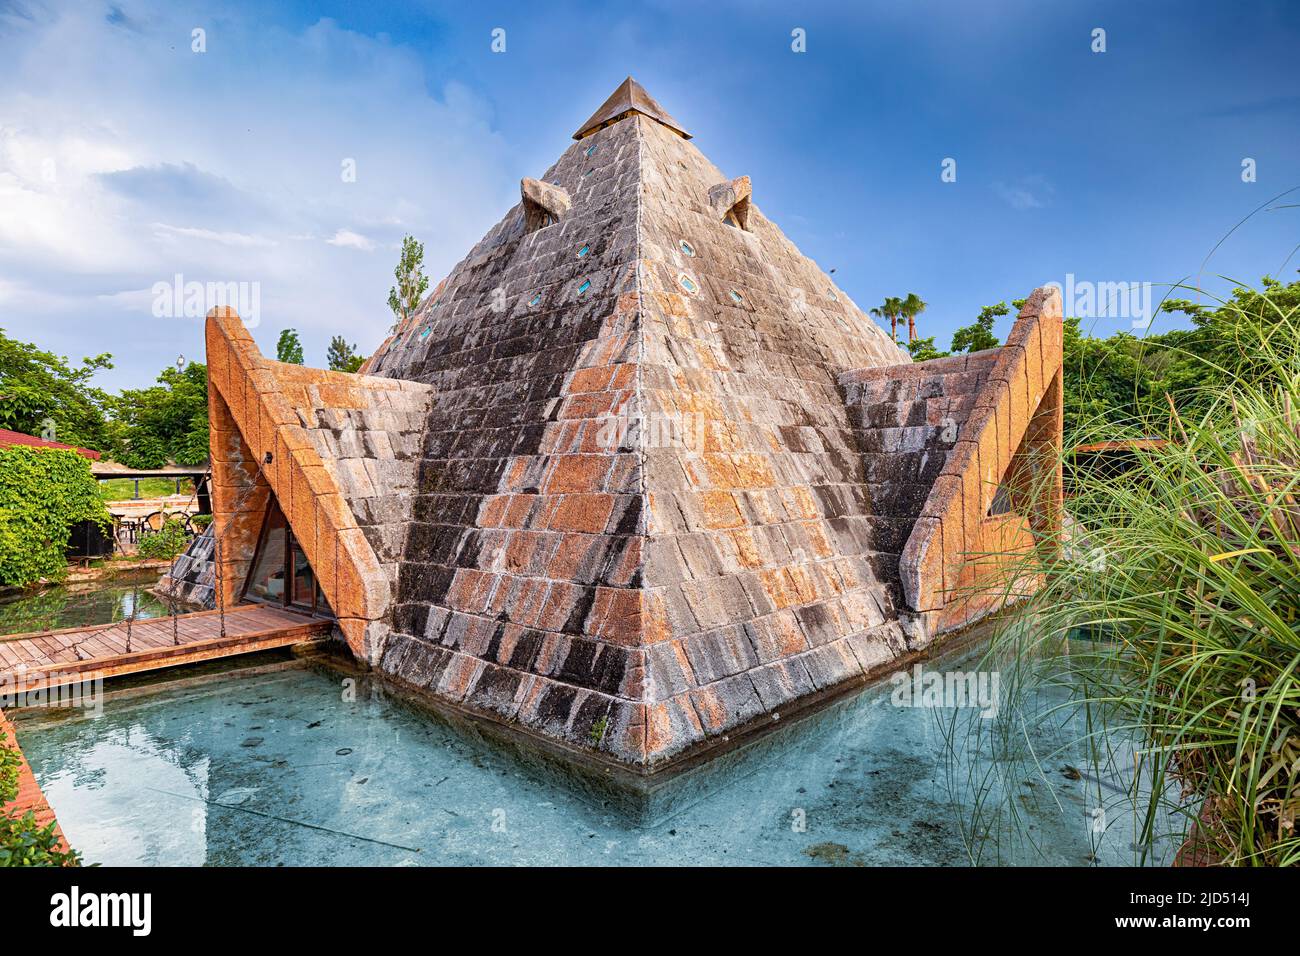 A pyramid mockup structure in the style and inspired by the Aztec and Mayan pyramids on the Yucatan Peninsula in Mexico Stock Photo